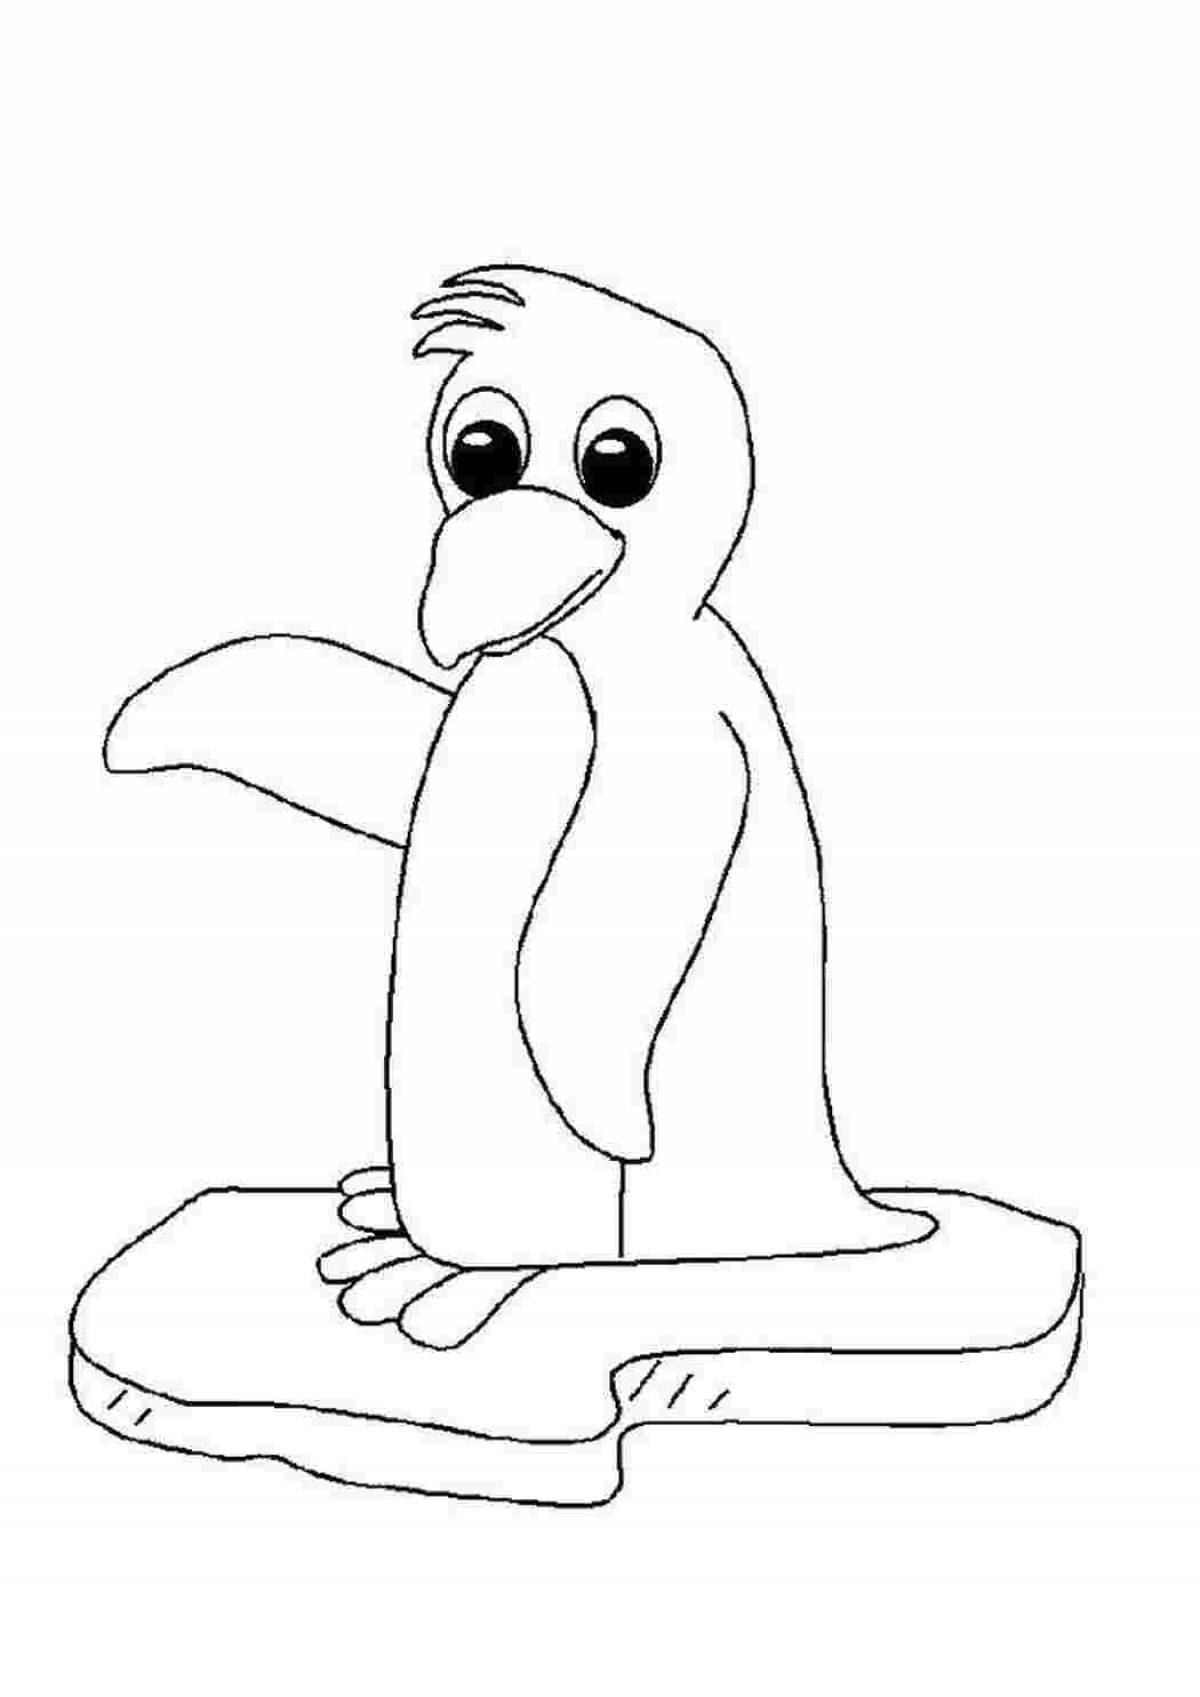 Glitter penguin coloring page